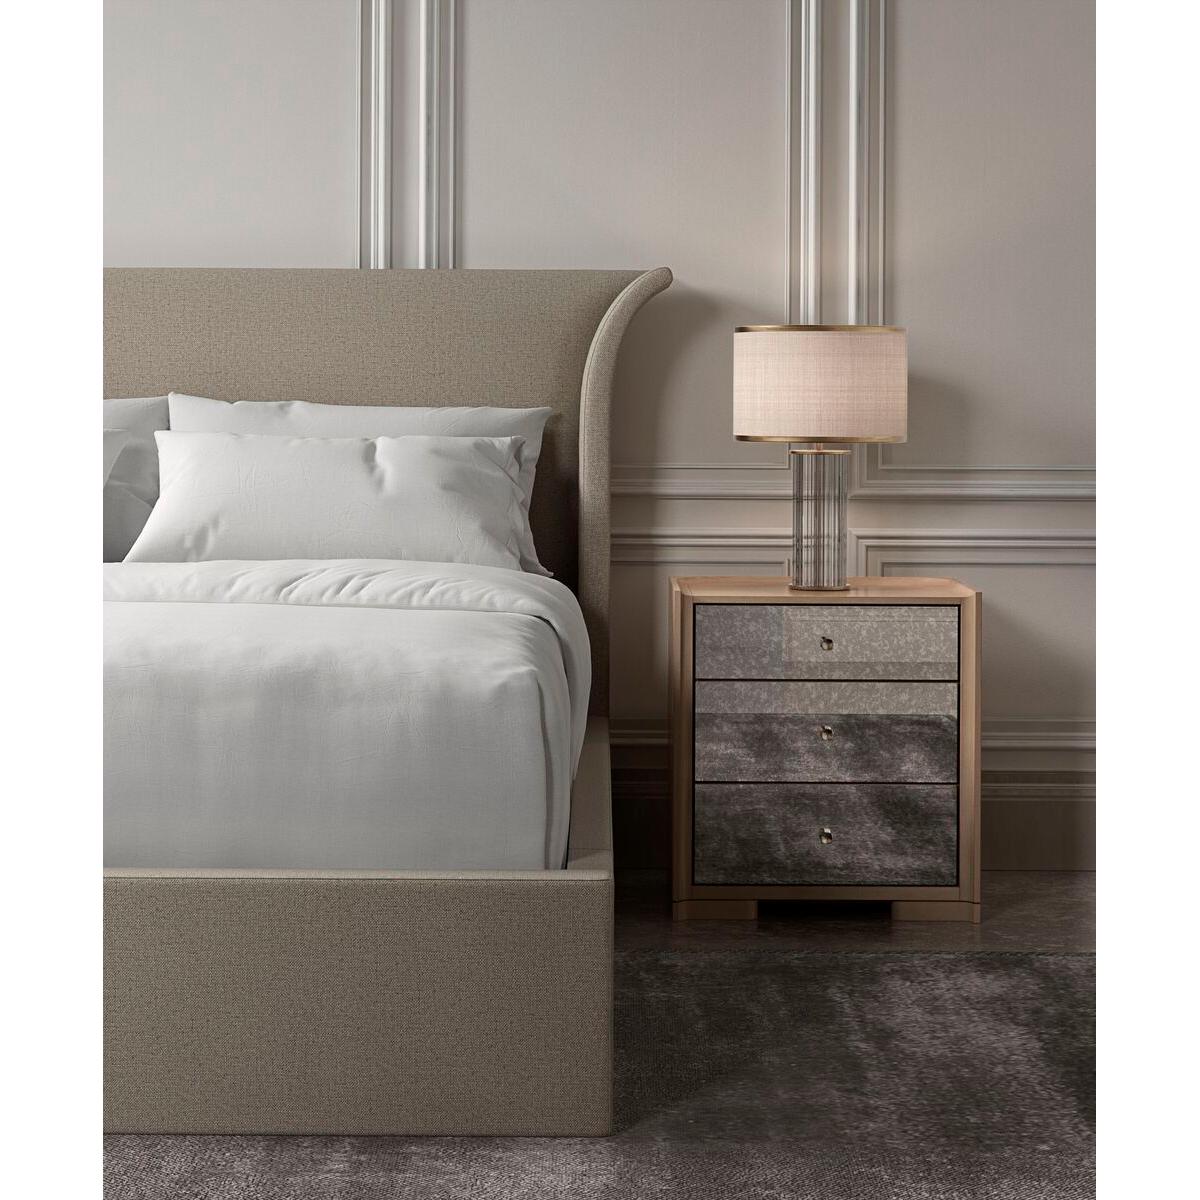 An elegant US king-sized upholstered bed frame featuring a high headboard that is flared out and curves gently at the sides. The frame is wrapped in a medium oatmeal color fabric with a subtle textured finish, which suggests a contemporary design